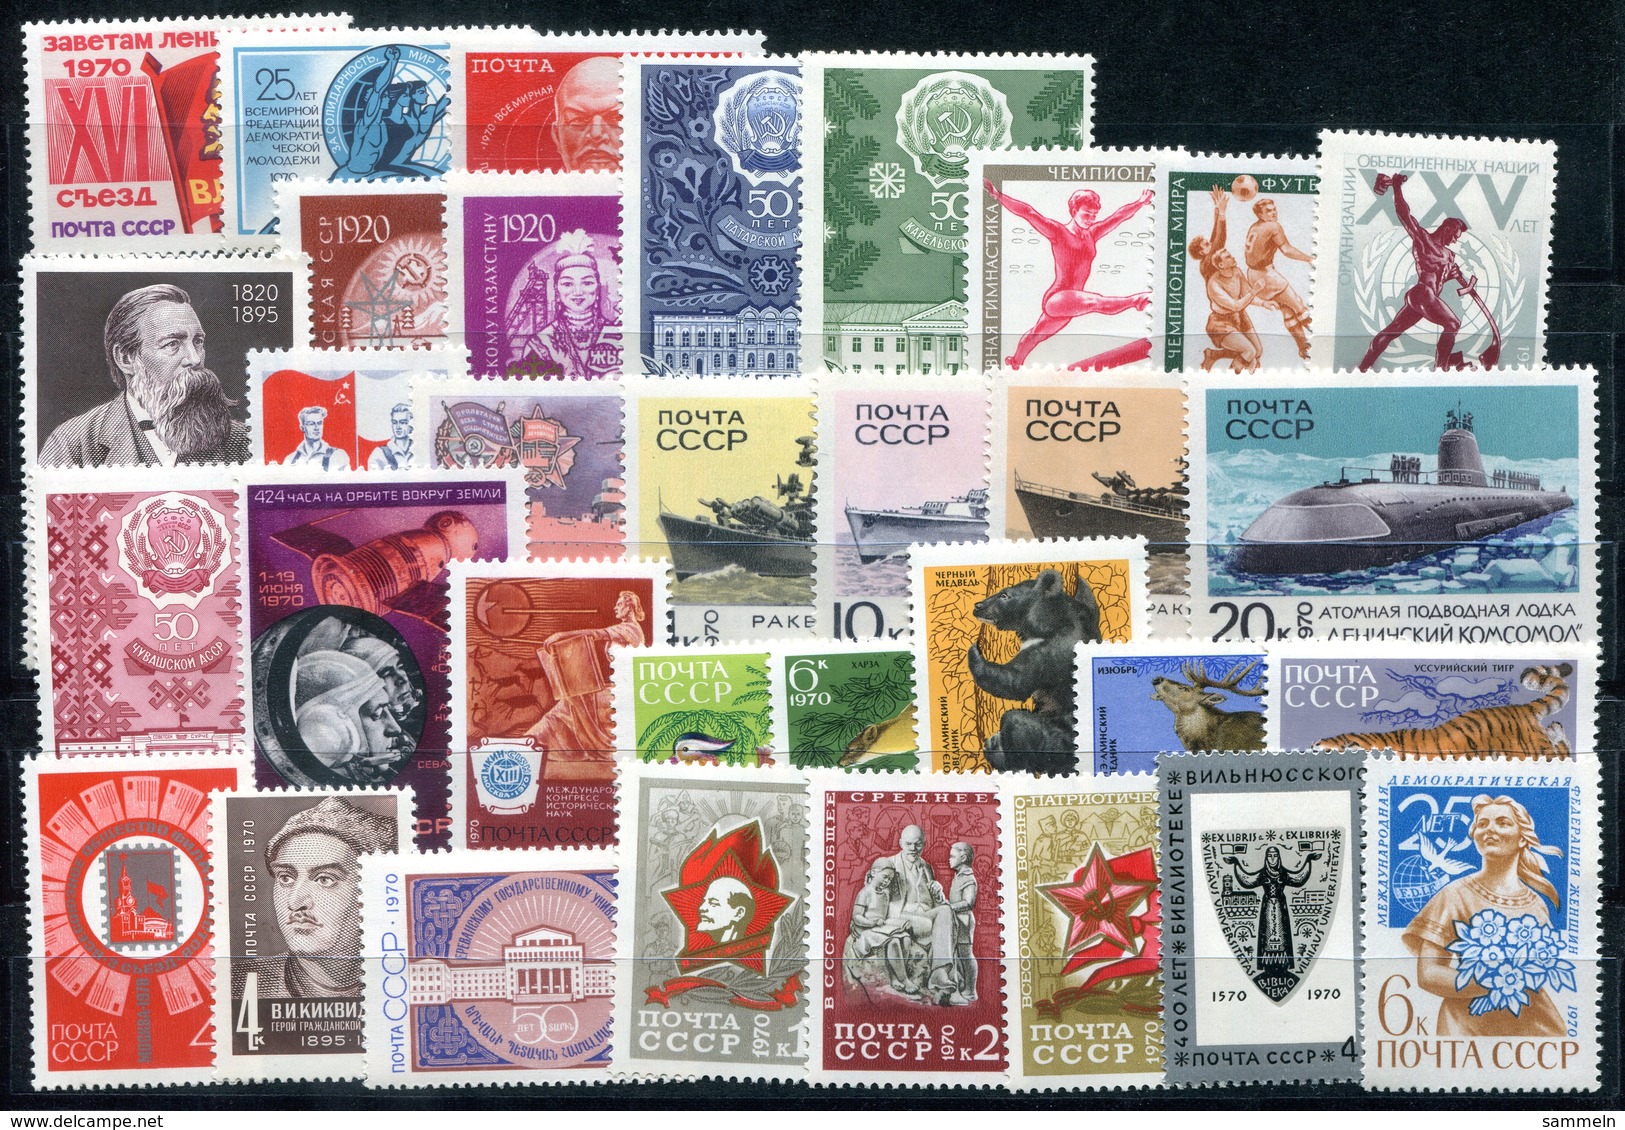 4386 - SOWJETUNION - Jahrgang 1970 Kpl. Postfrisch - Year 1970 Complete In Mnh UdSSR - Full Years